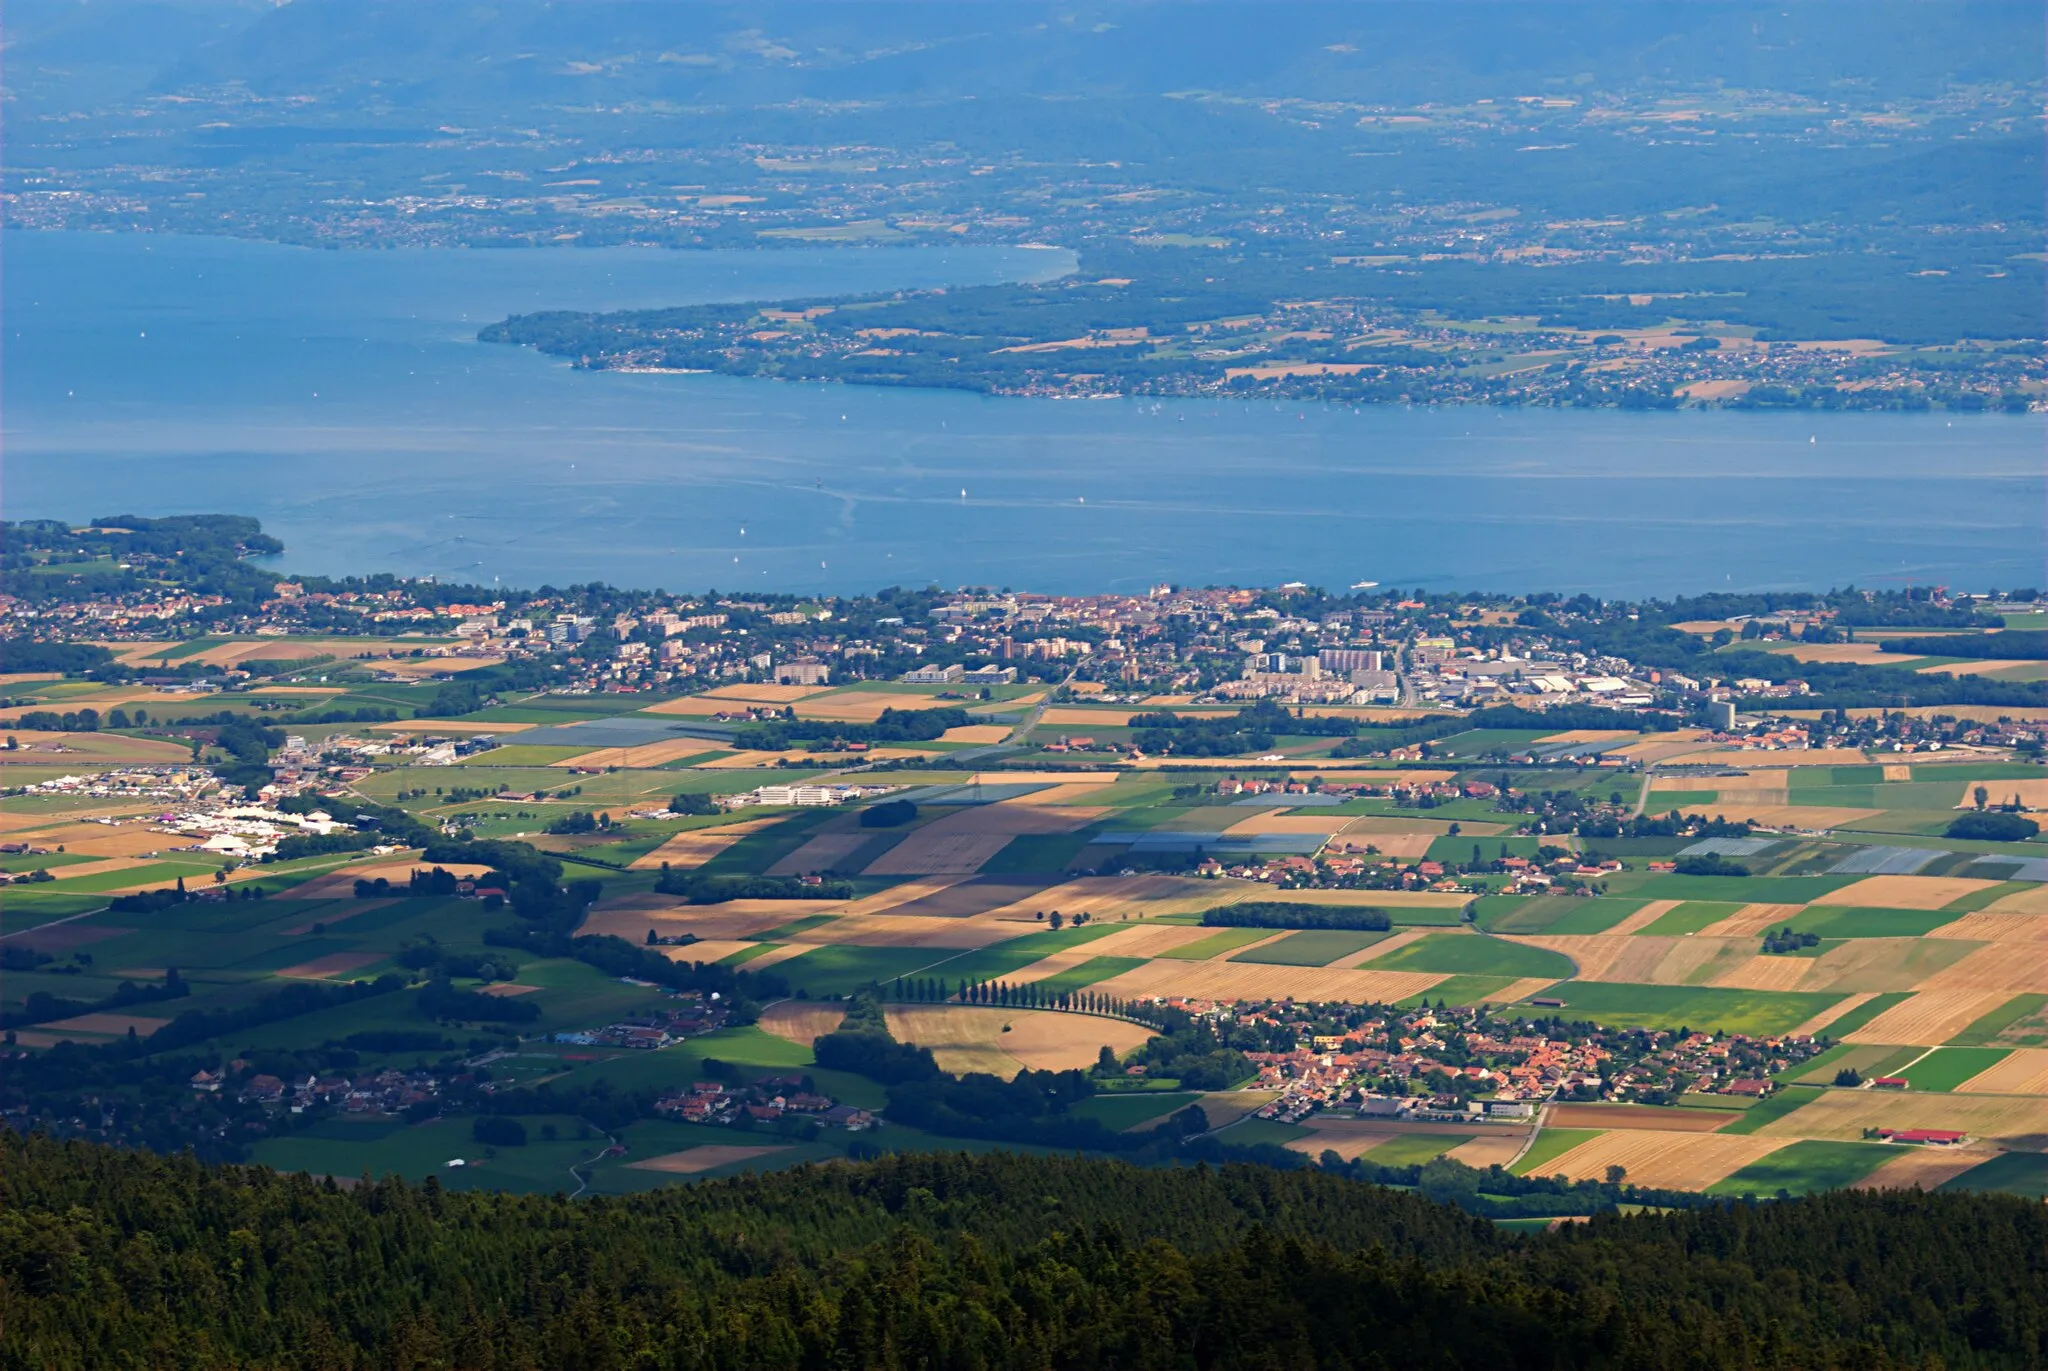 Photo showing: The town of Nyon, the lake Geneva, the french departement of Haute-Savoie, viewed from the La Dôle summit, in Switzerland.